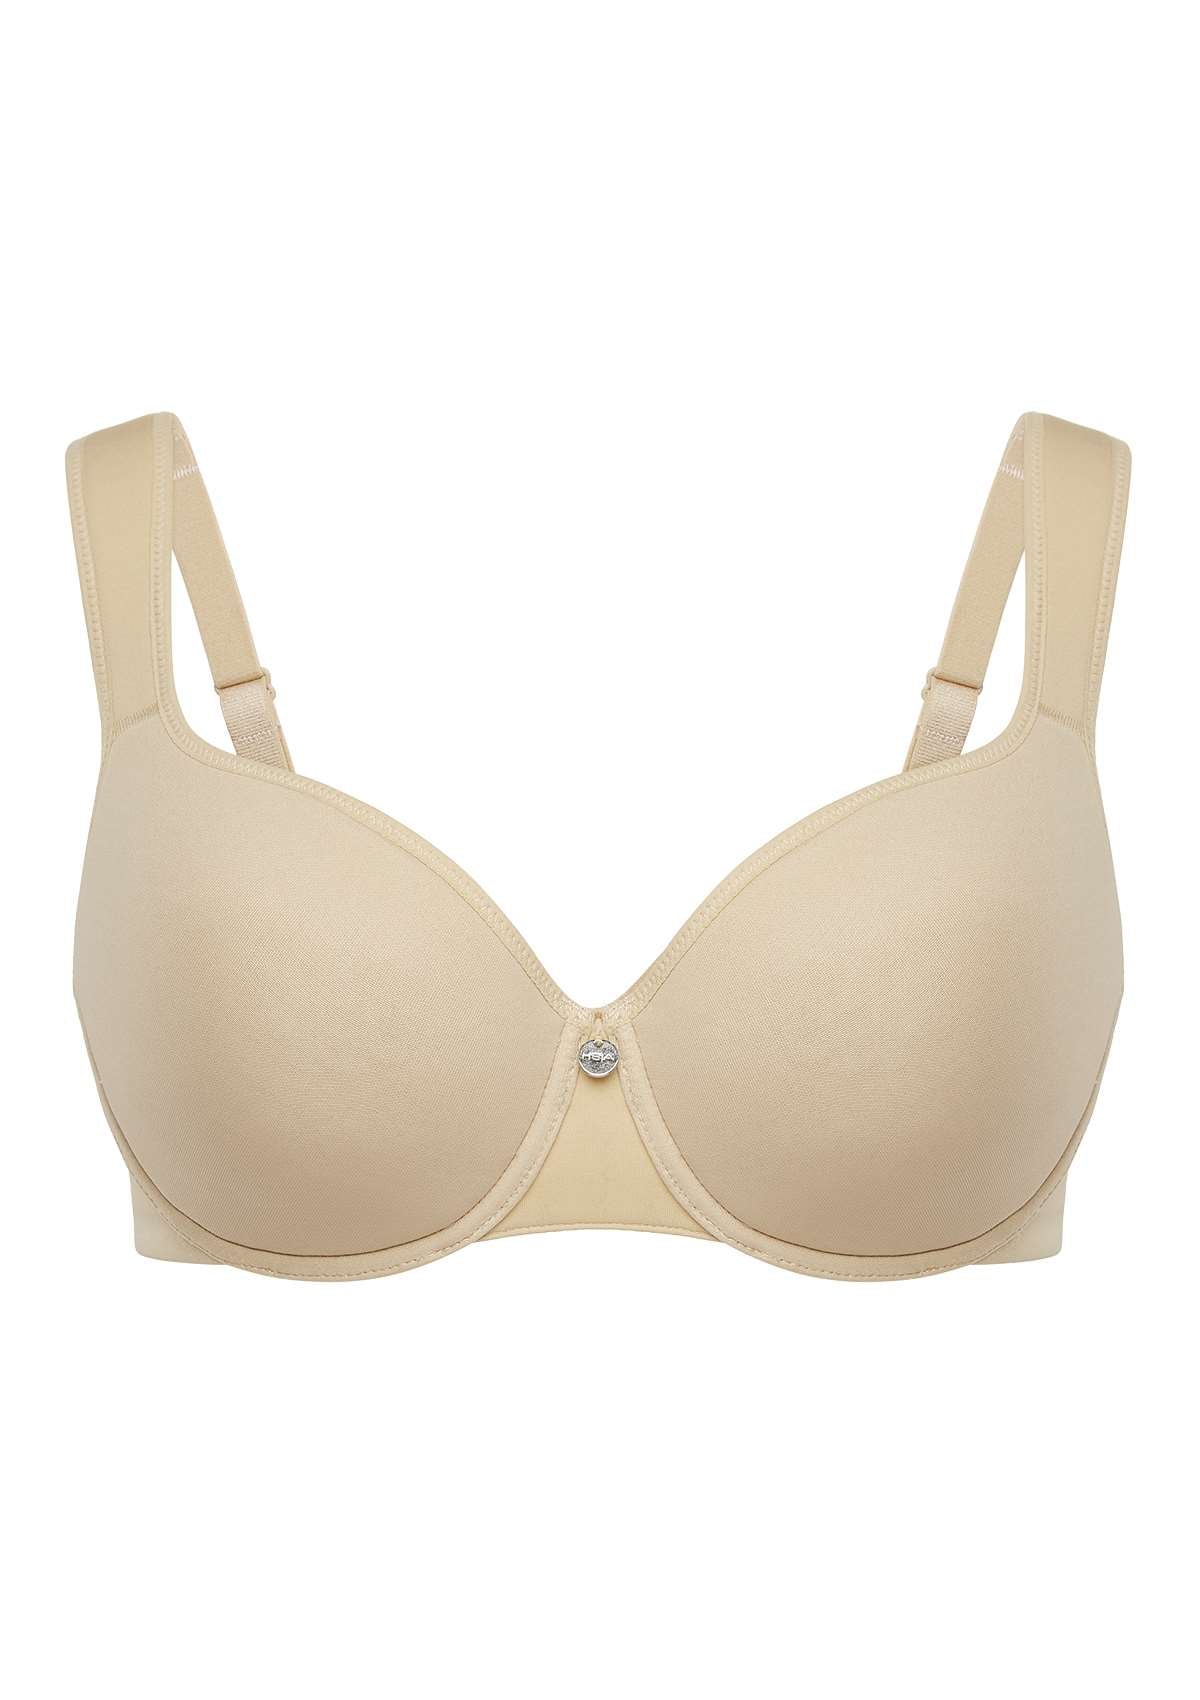 HSIA Patricia Seamless Lightly Padded Minimizer Bra -for Bigger Busts - Beige / 36 / G